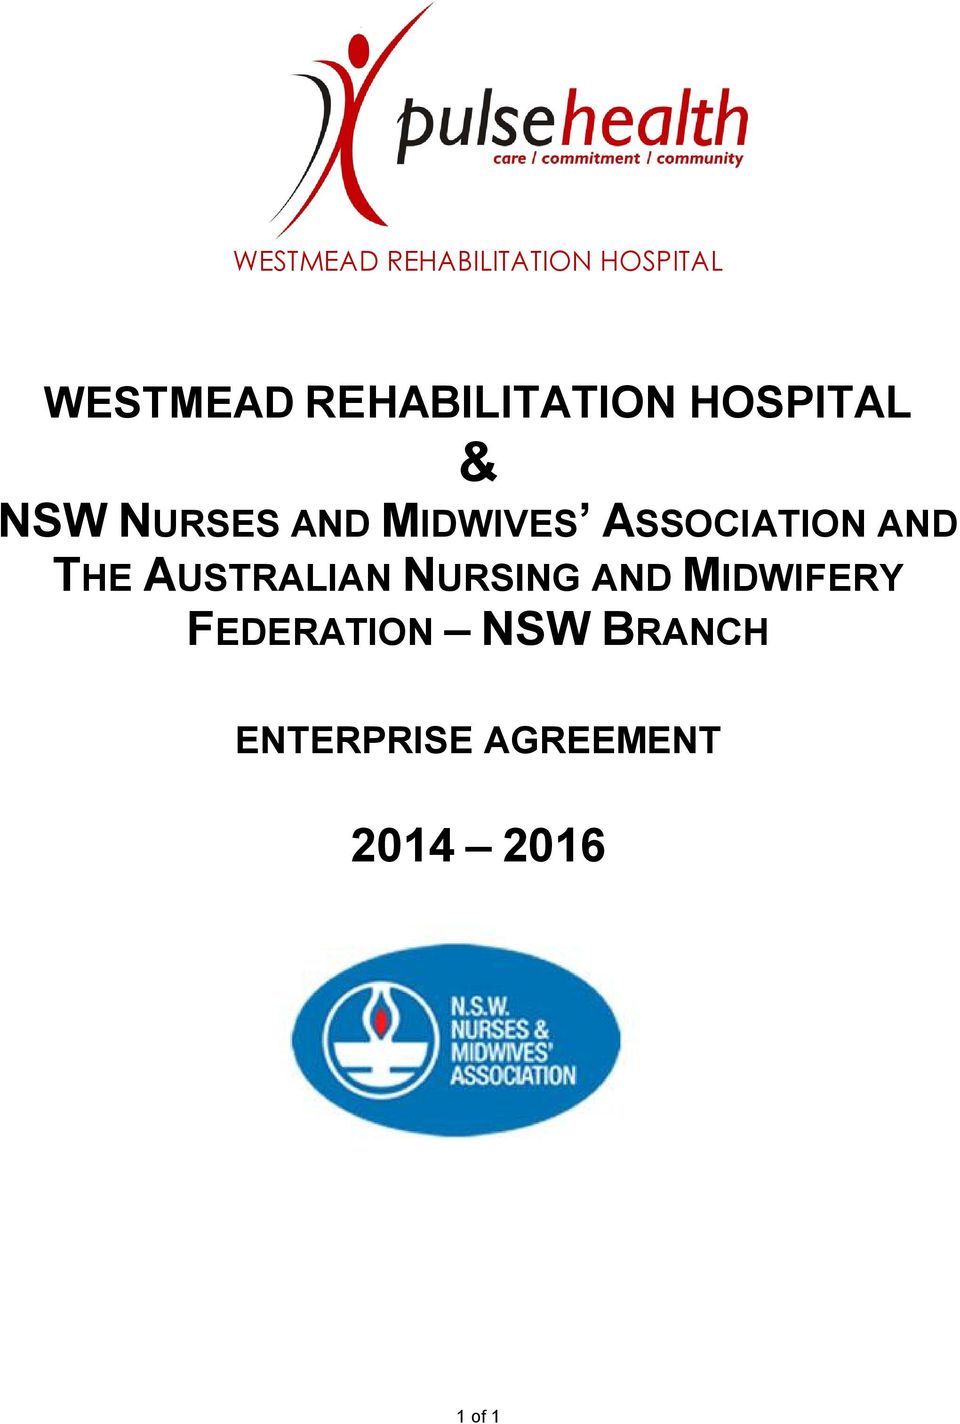 ASSOCIATION AND THE AUSTRALIAN NURSING AND